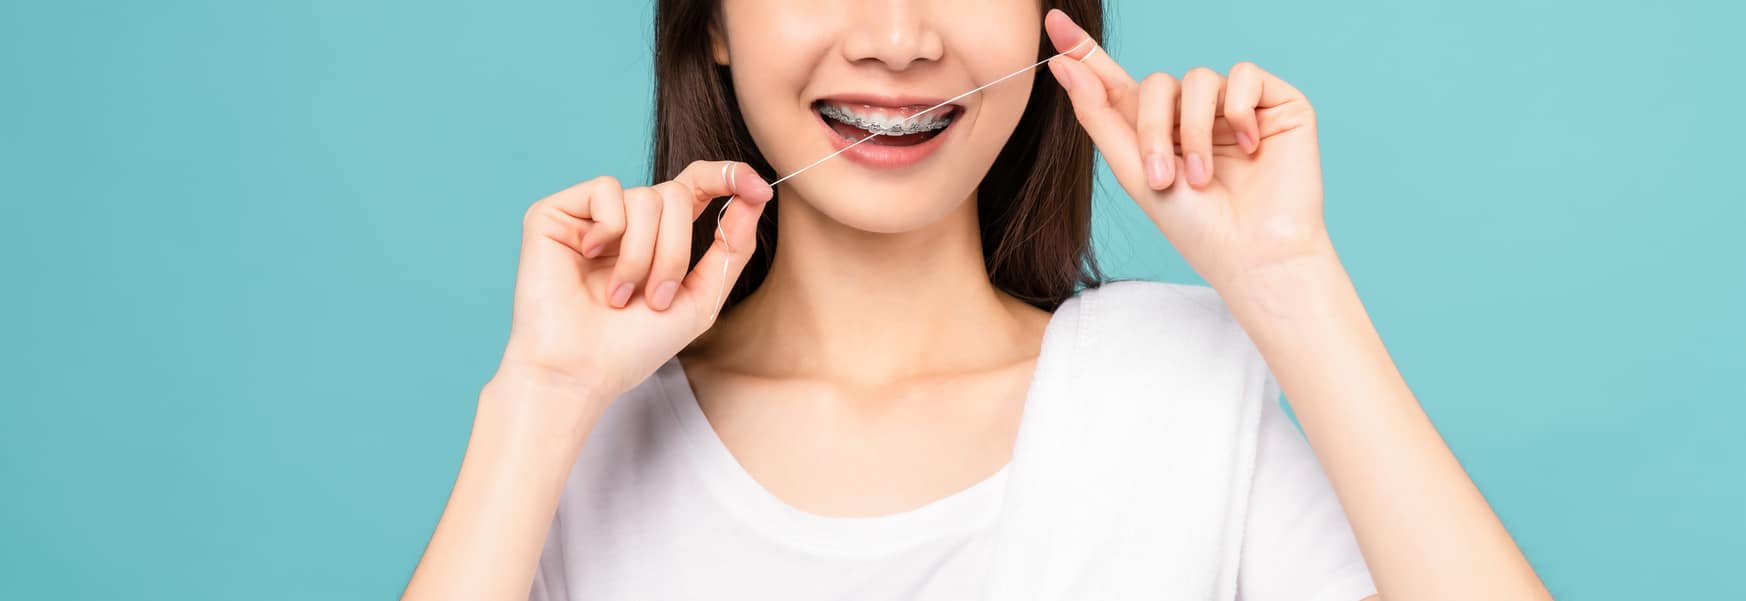 Smiling woman cleaning braces on teeth with dental floss on blue background, Concept oral hygiene.